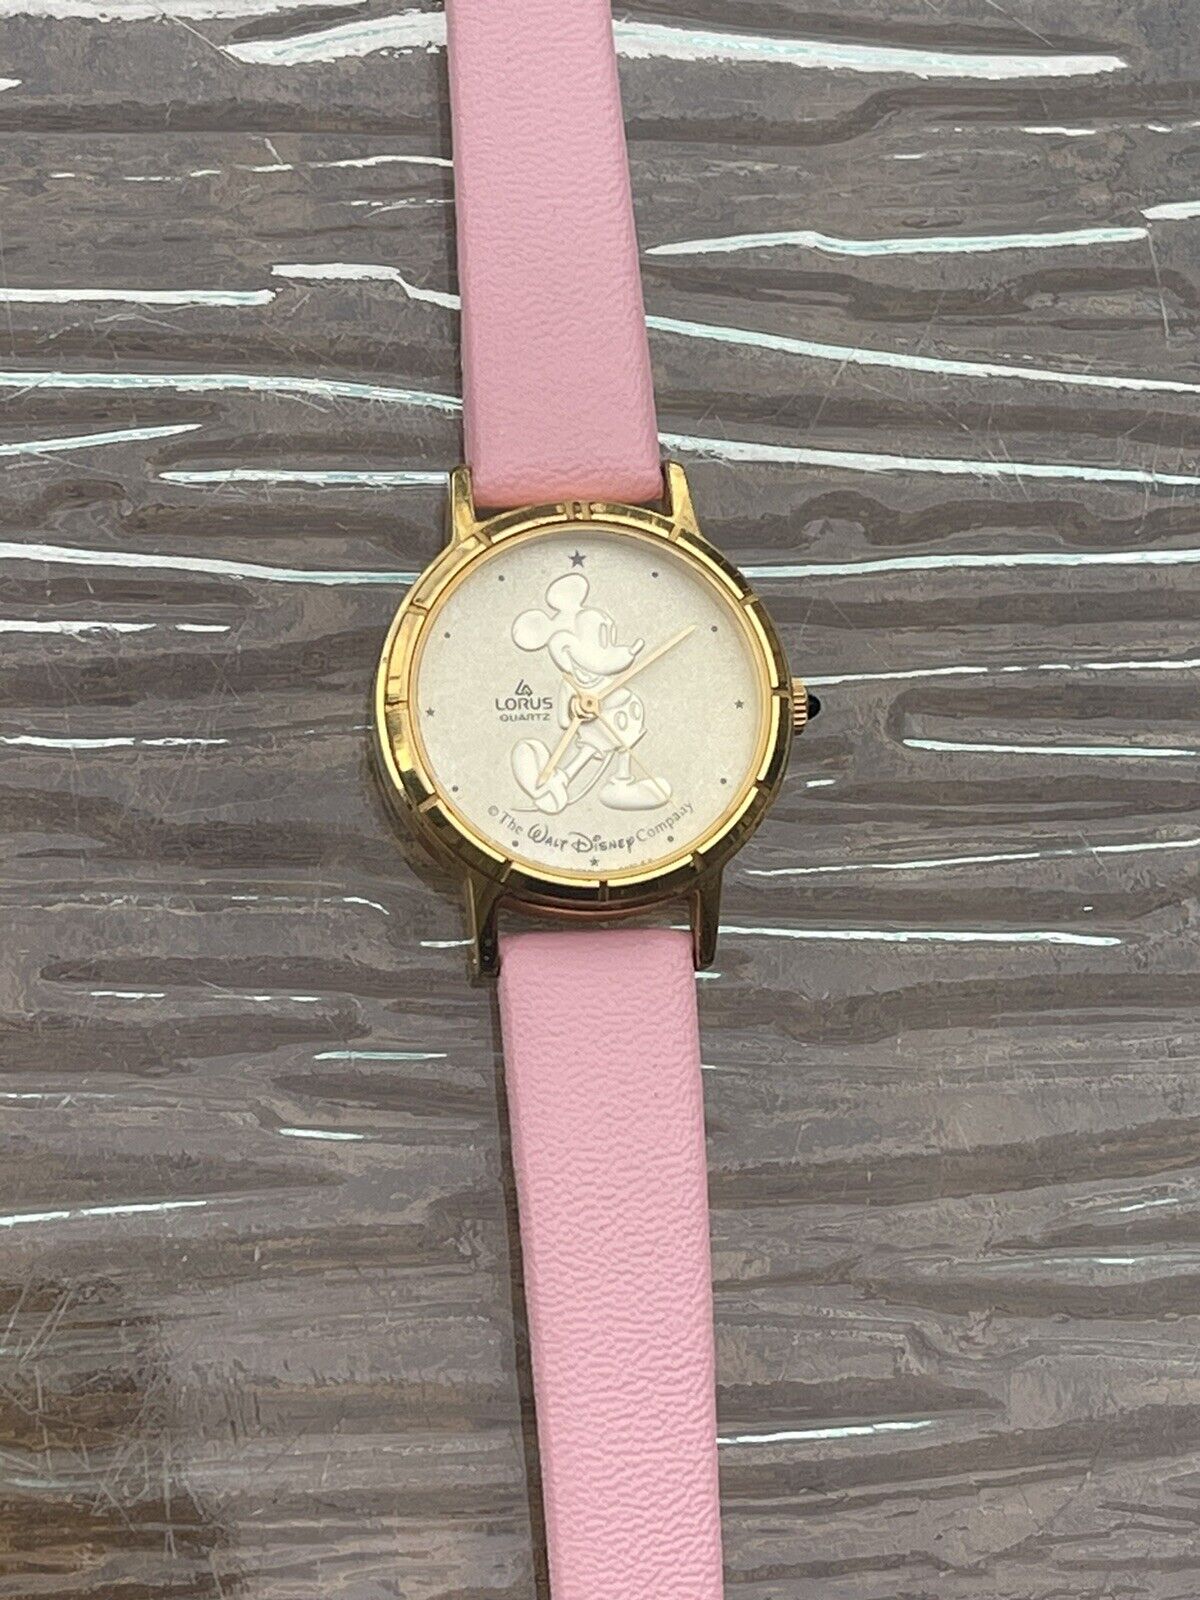 *WORKS* Mickey Mouse Walt Disney Gold Pink Leather SEIKO Lorus NEW BATTERY